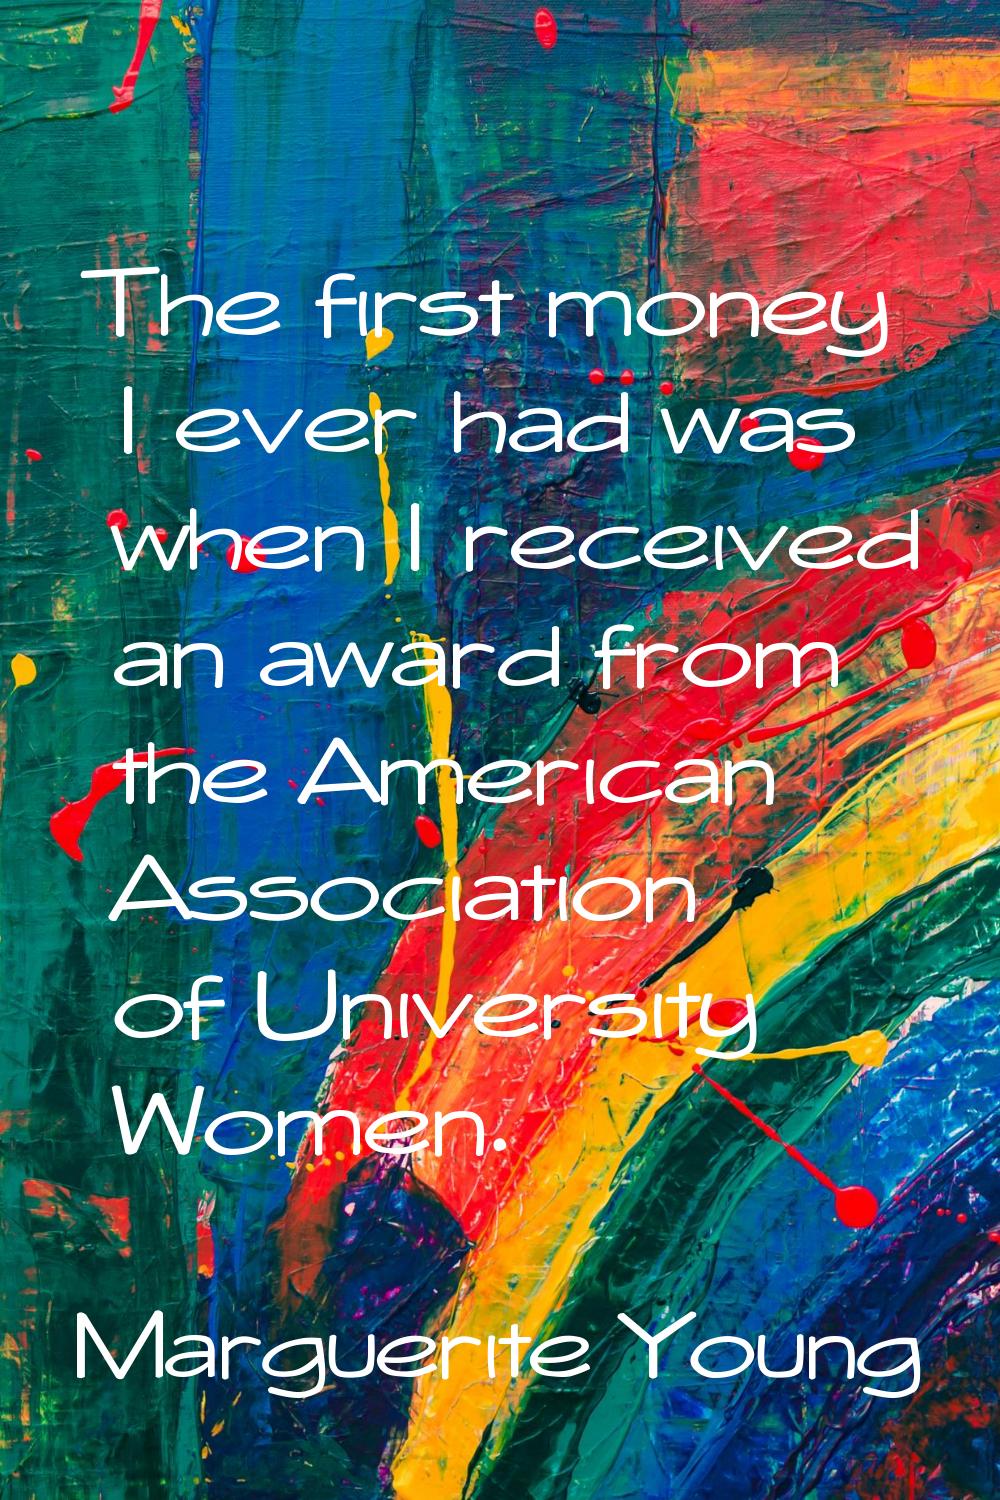 The first money I ever had was when I received an award from the American Association of University